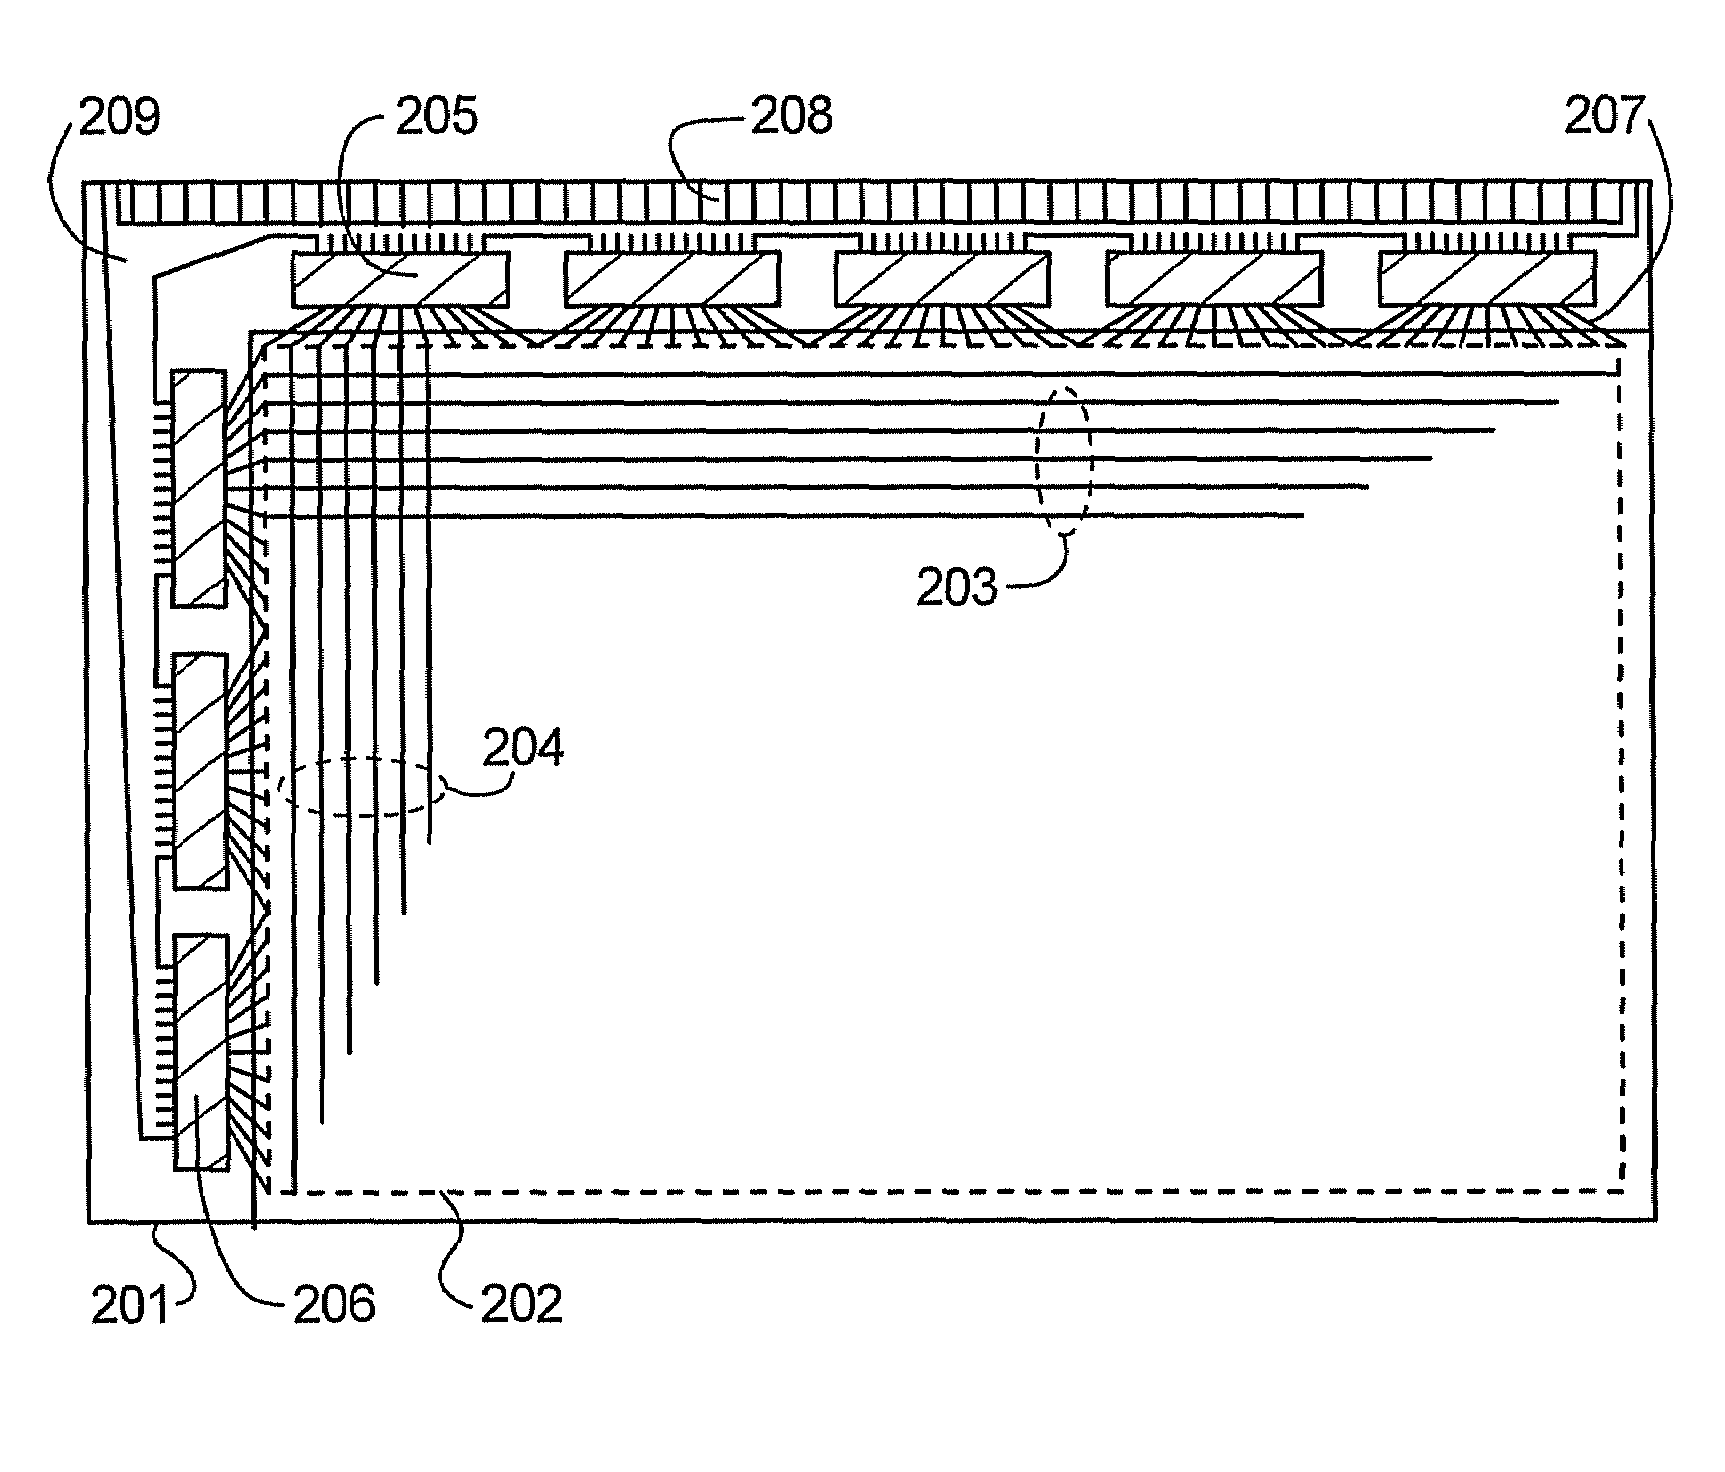 Light emitting apparatus and method of manufacturing the same